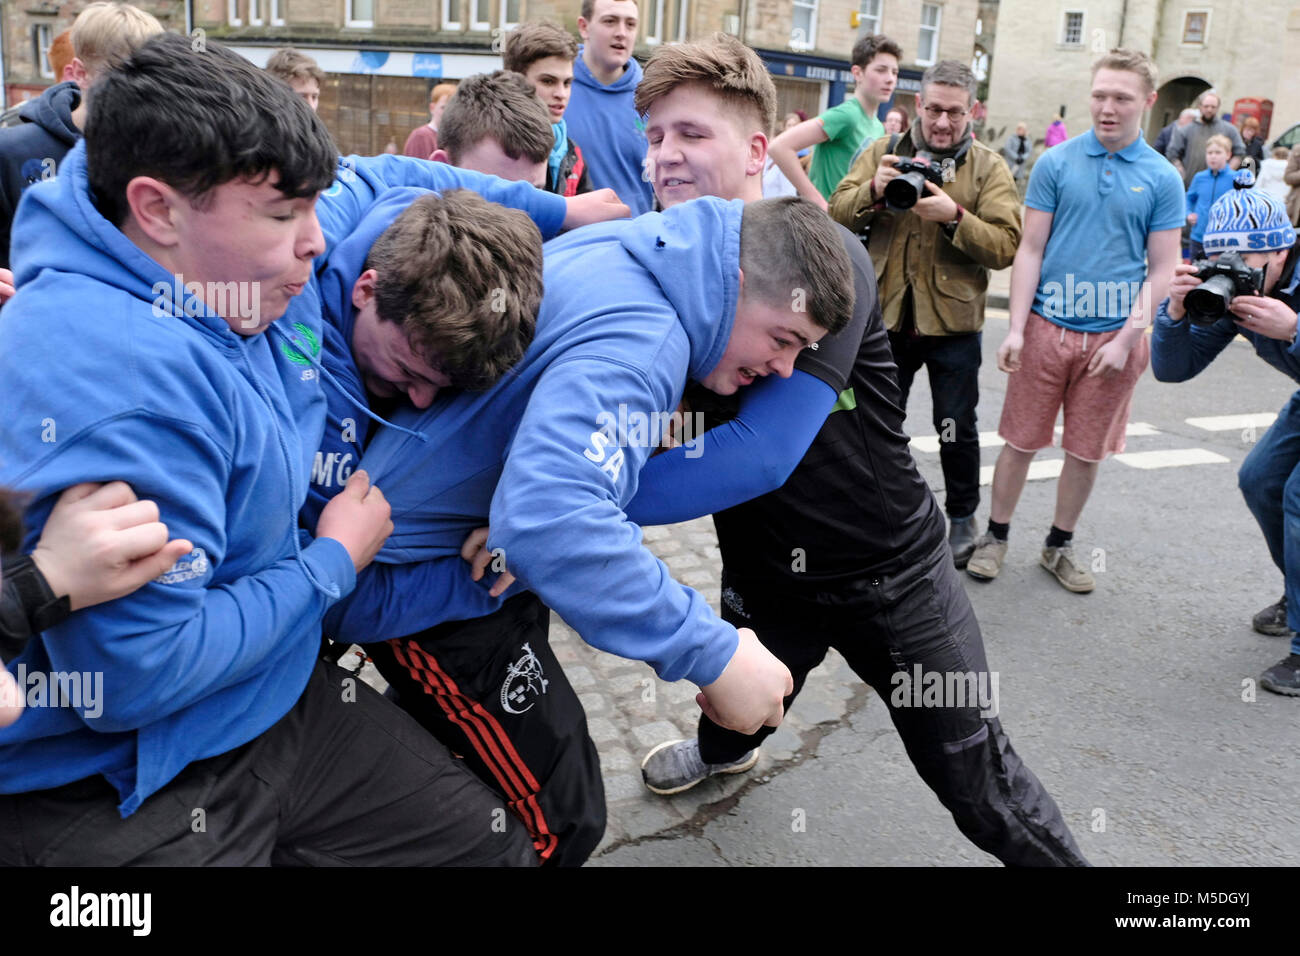 Jedburgh, Mercat Cross, UK. 22nd Feb, 2018. Jed Hand Ba' The annual game of hand ba' takes place every year the Thursday after Fastern's E'en. The tradition derives from 1548 when a party of Scots recaptured Ferniehirst Castle, a mile south of Jedburgh and used an Englishman's head in a celebratory game after the battle. ( Credit: Rob Gray/Alamy Live News Stock Photo